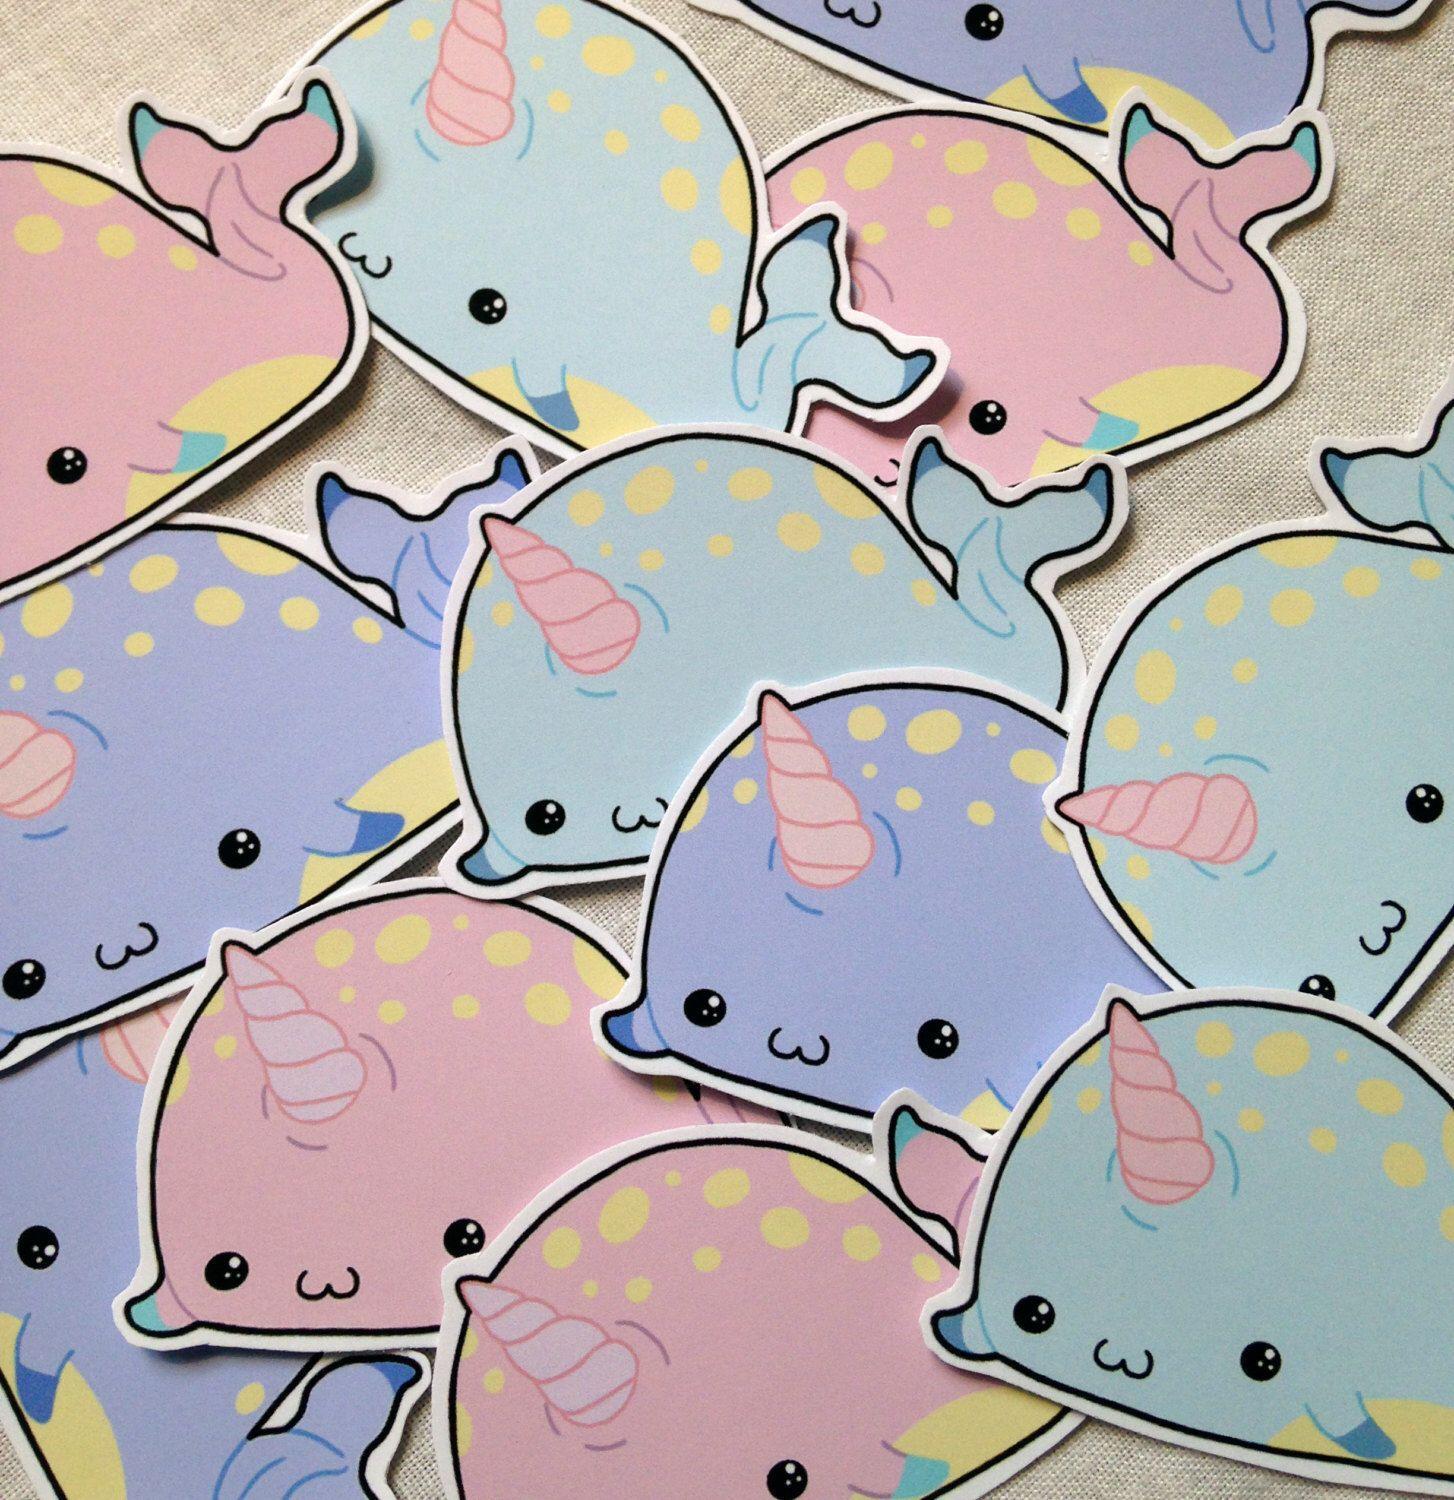 Cute Narwhal Pattern fabric by maribiscuits on Spoonflower